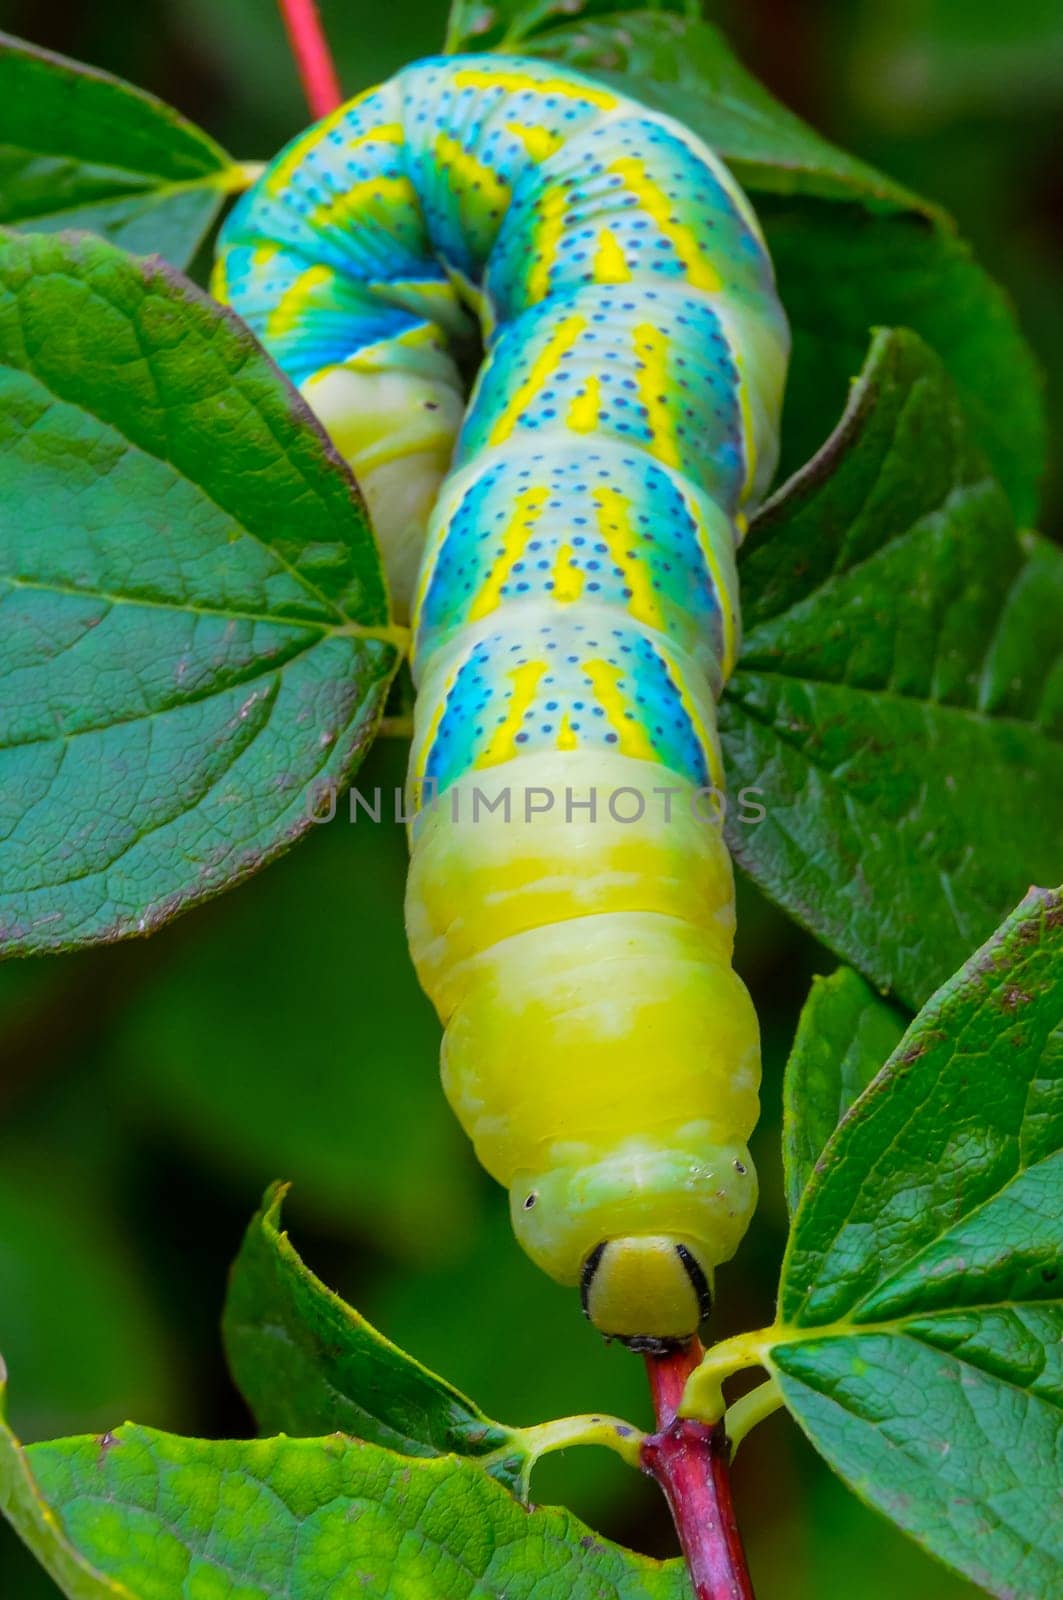 The African death's-head hawkmoth (Acherontia atropos), A nocturnal butterfly caterpillar crawls on the red stem of a plant by Hydrobiolog